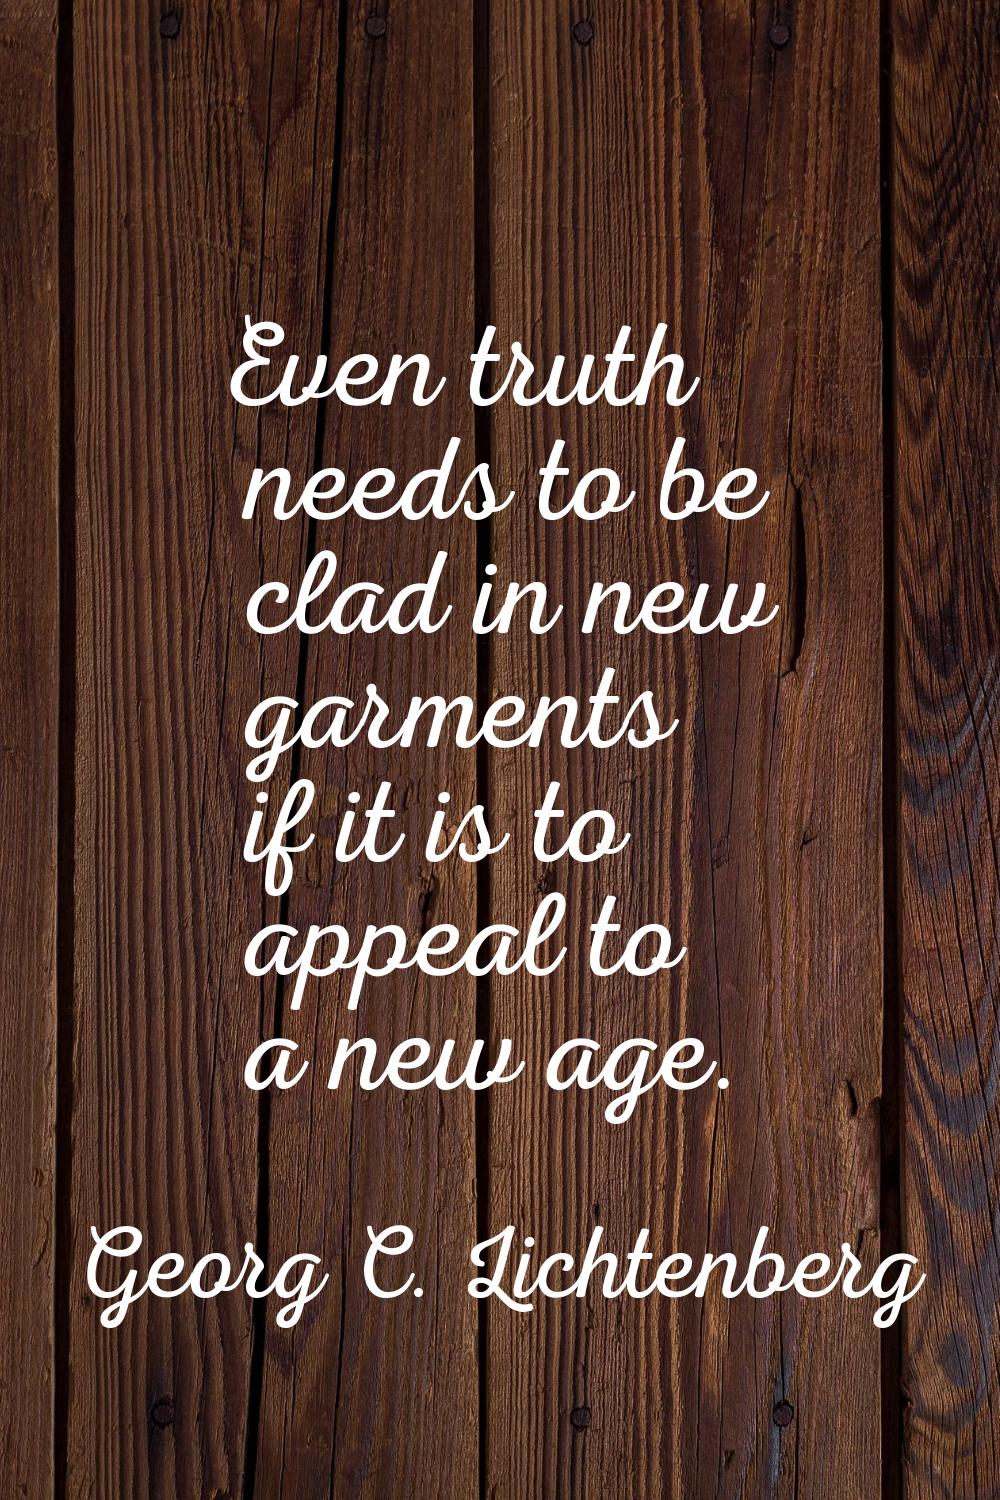 Even truth needs to be clad in new garments if it is to appeal to a new age.